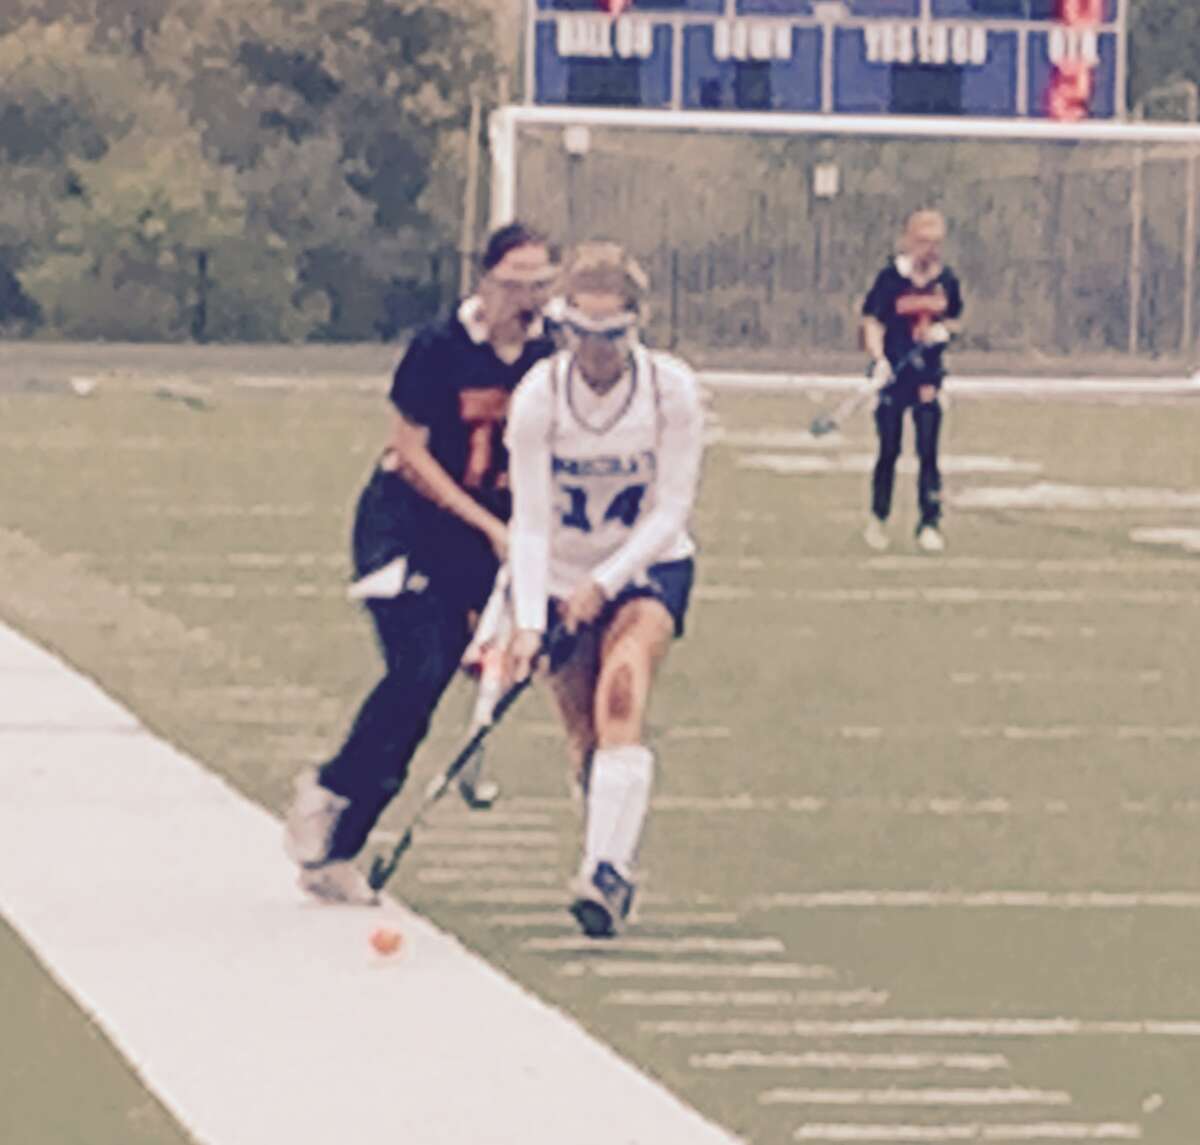 Action from the Watertown at Immaculate field hockey game on Oct. 2, 2015. Immaculate won, 3-1.